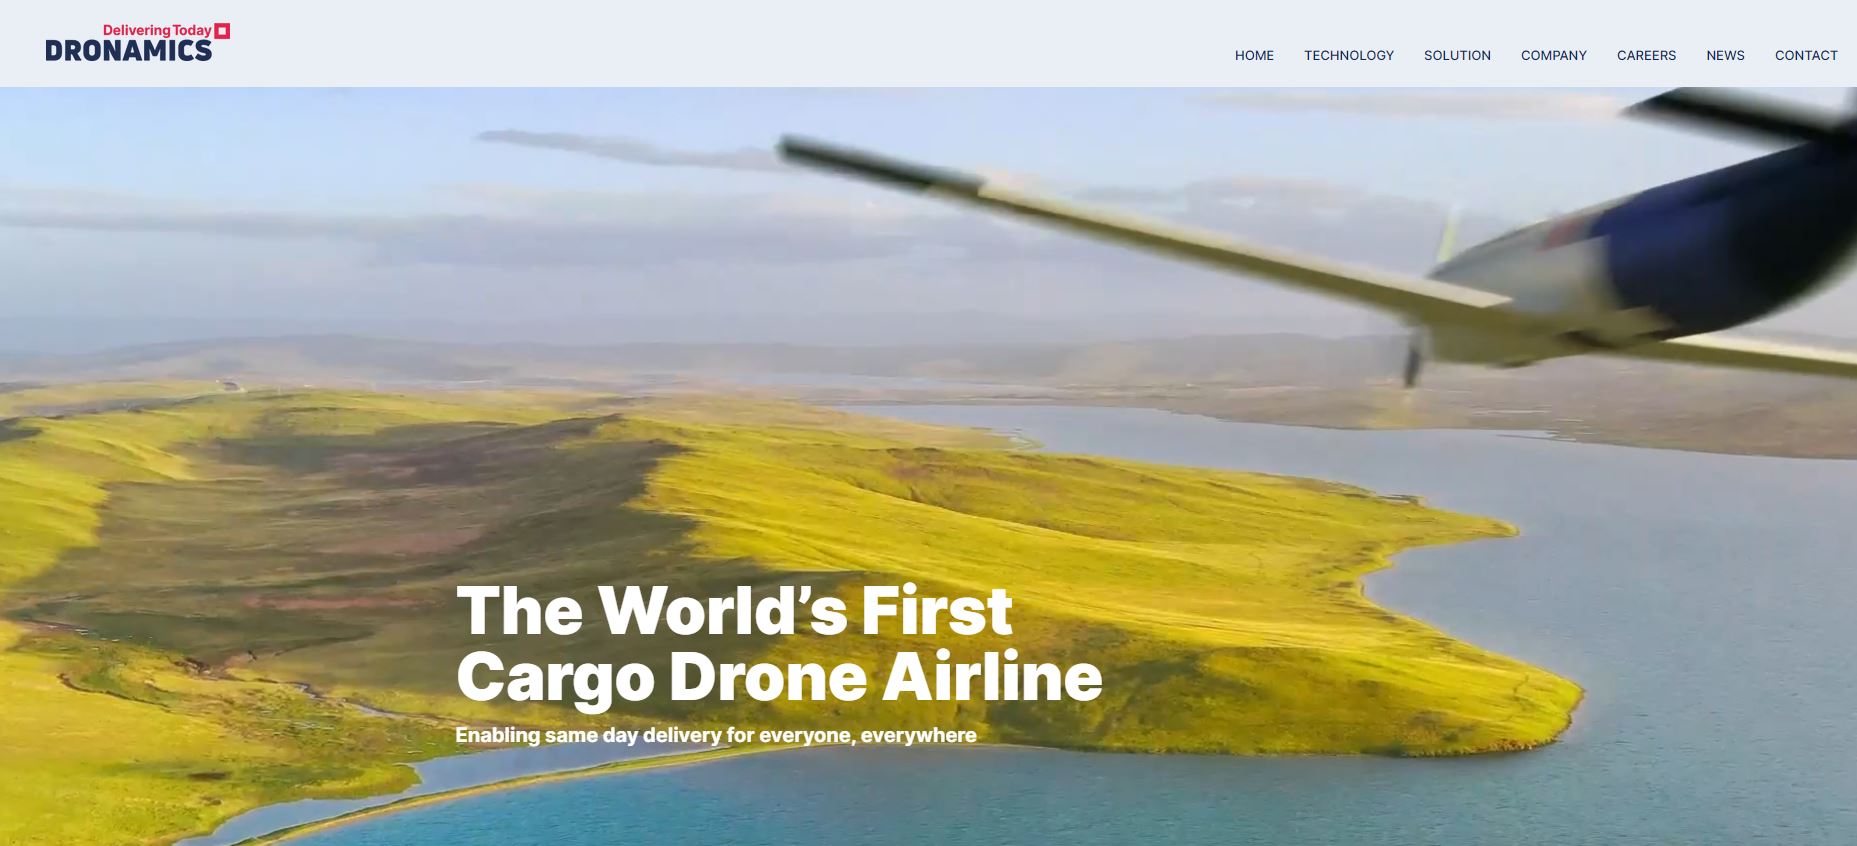 With an impressive $40M in funding from investors, DRONAMICS has created an all-in-one solution